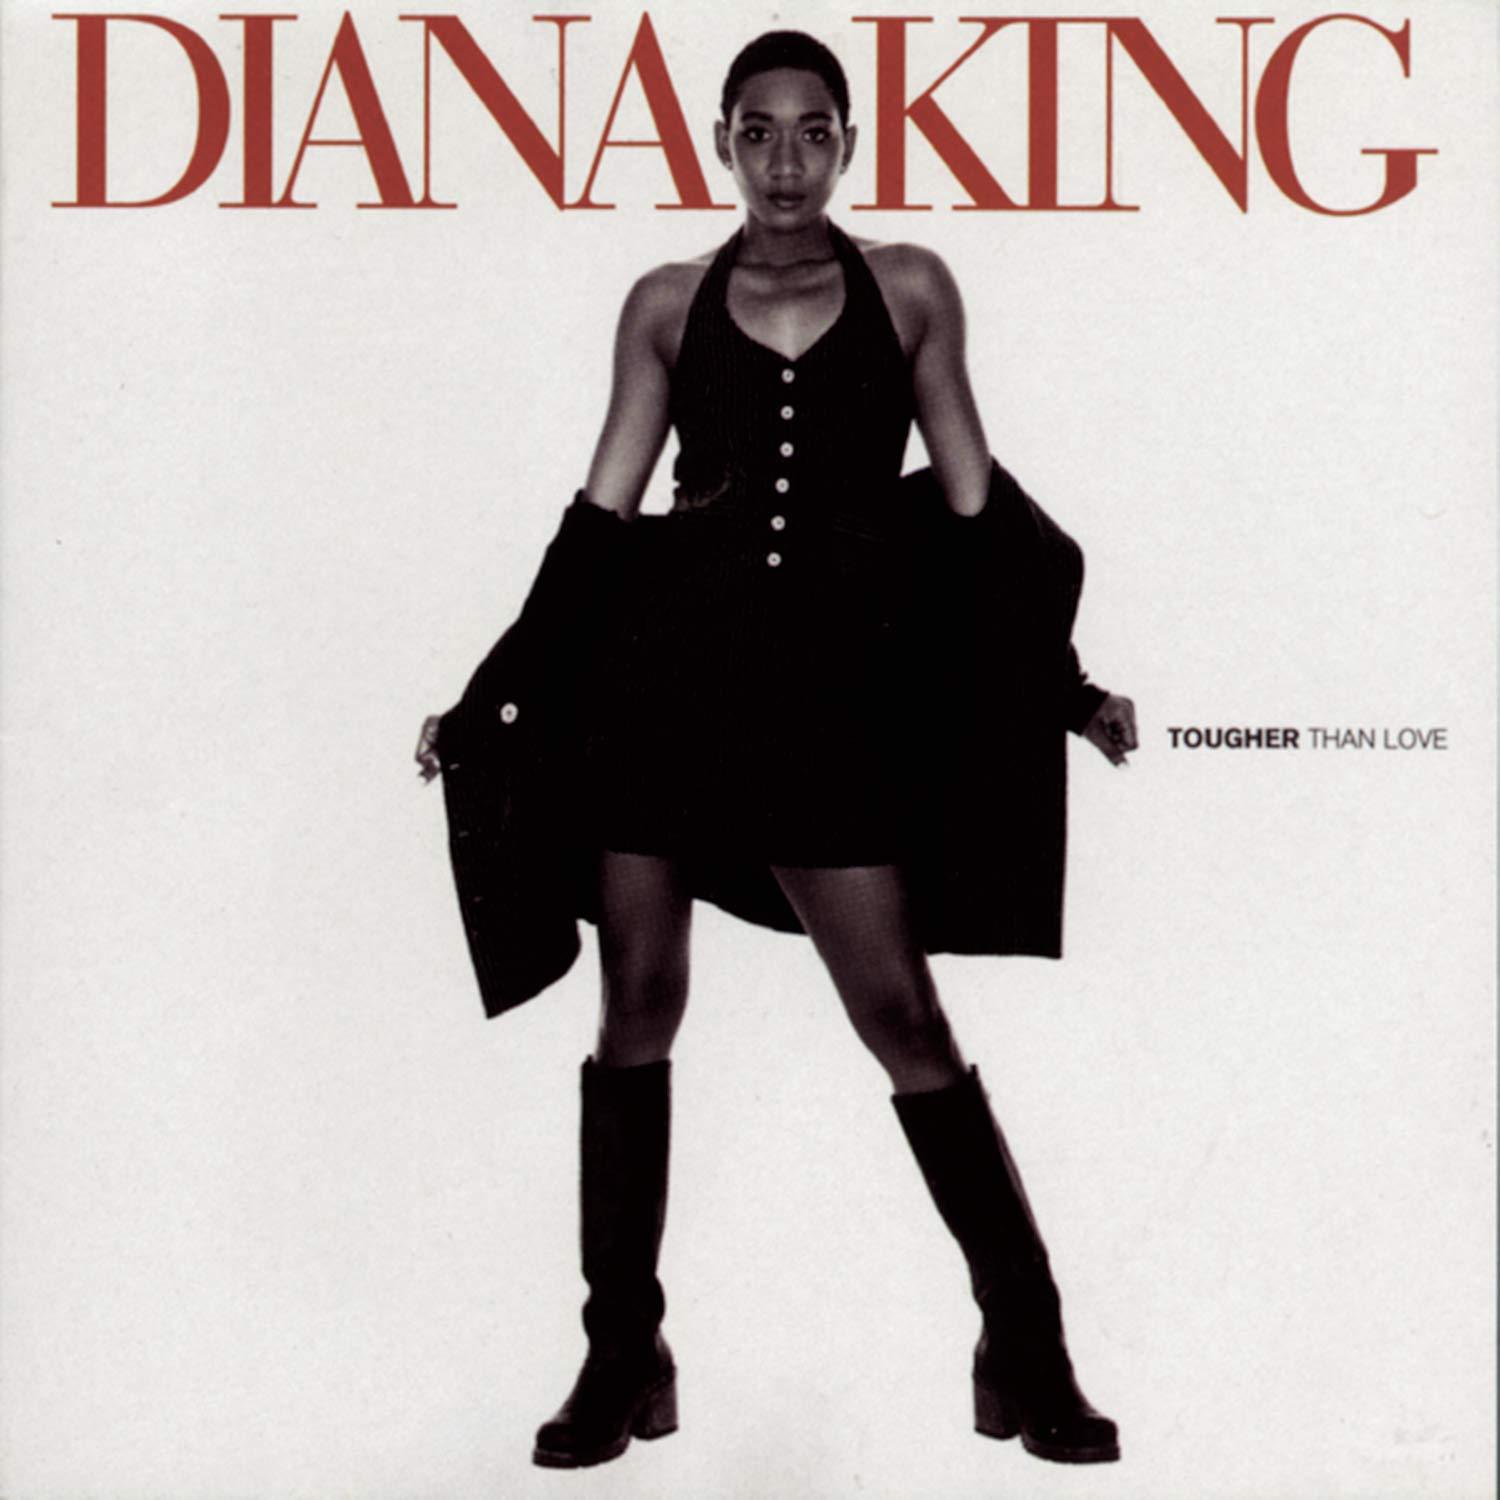 Diana King- Tougher Than Love - Darkside Records